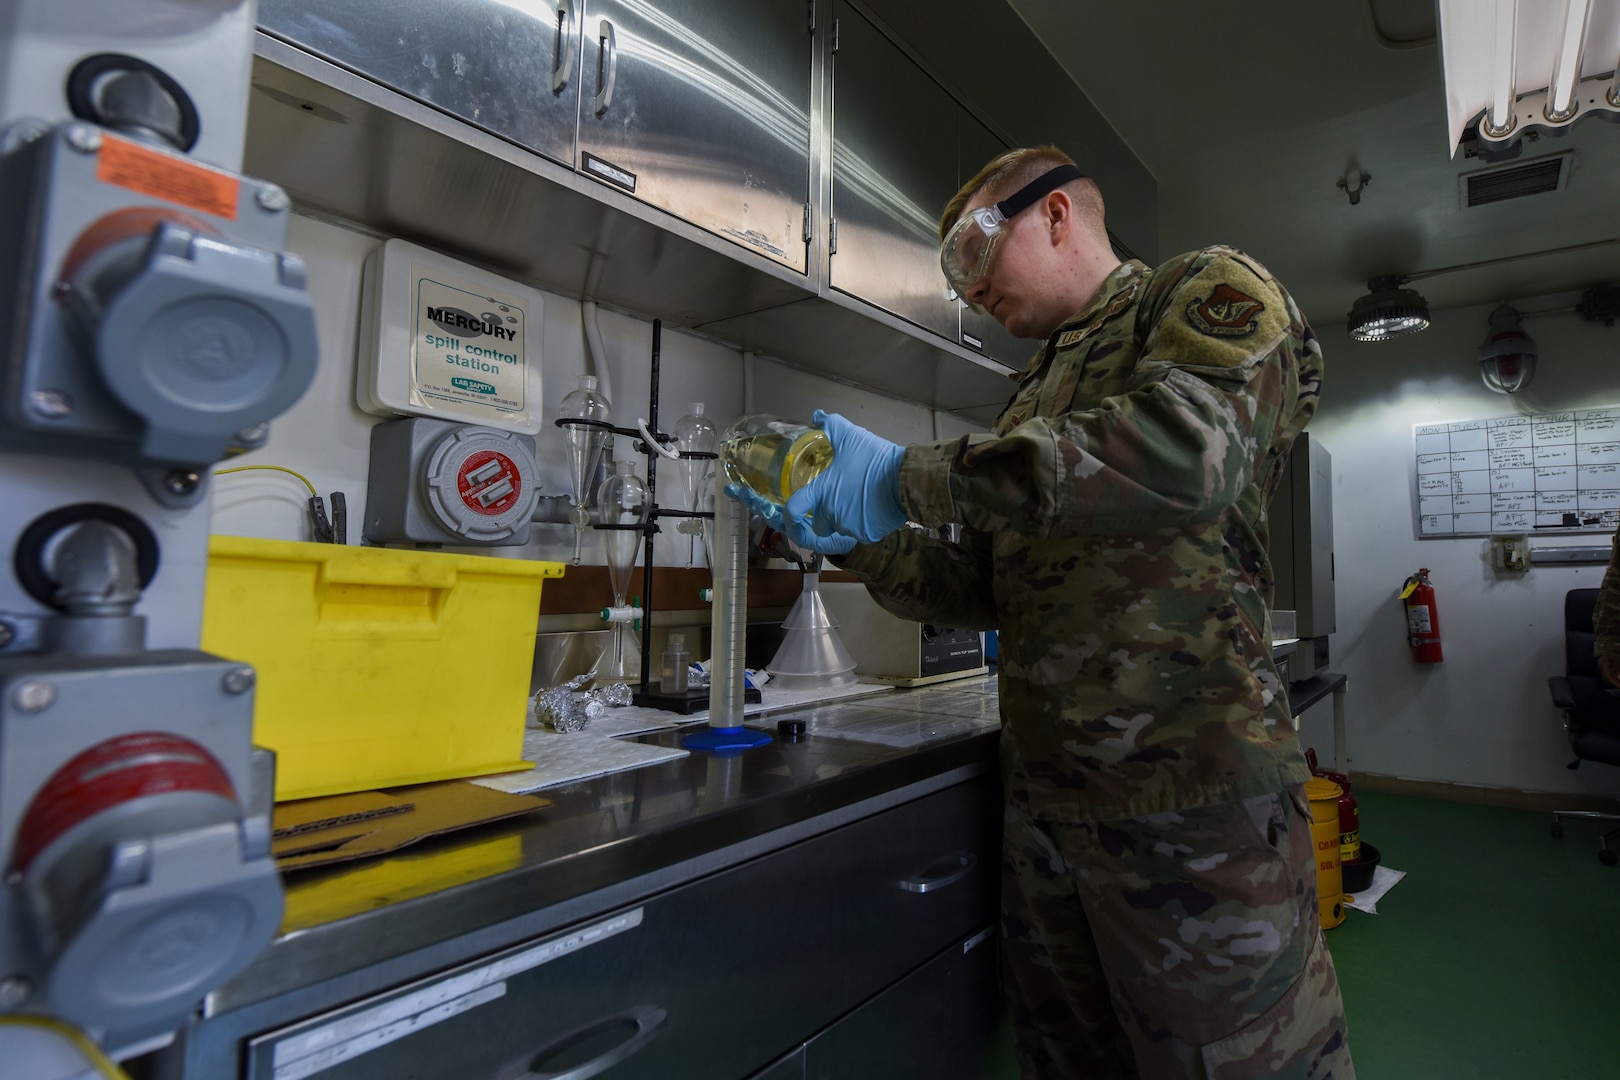 U.S. Air Force Senior Airman Cody Lane, 8th Logistics Readiness Squadron fuels laboratory technician, runs a fuel system icing inhibitor or “fizzy sample” in the fuels laboratory at Kunsan Air Base, Republic of Korea, April 3, 2020. A “fizzy sample” bonds to the water in jet fuel to prevent the water from freezing. (U.S. Air Force photo by Senior Airman Jessica Blair)